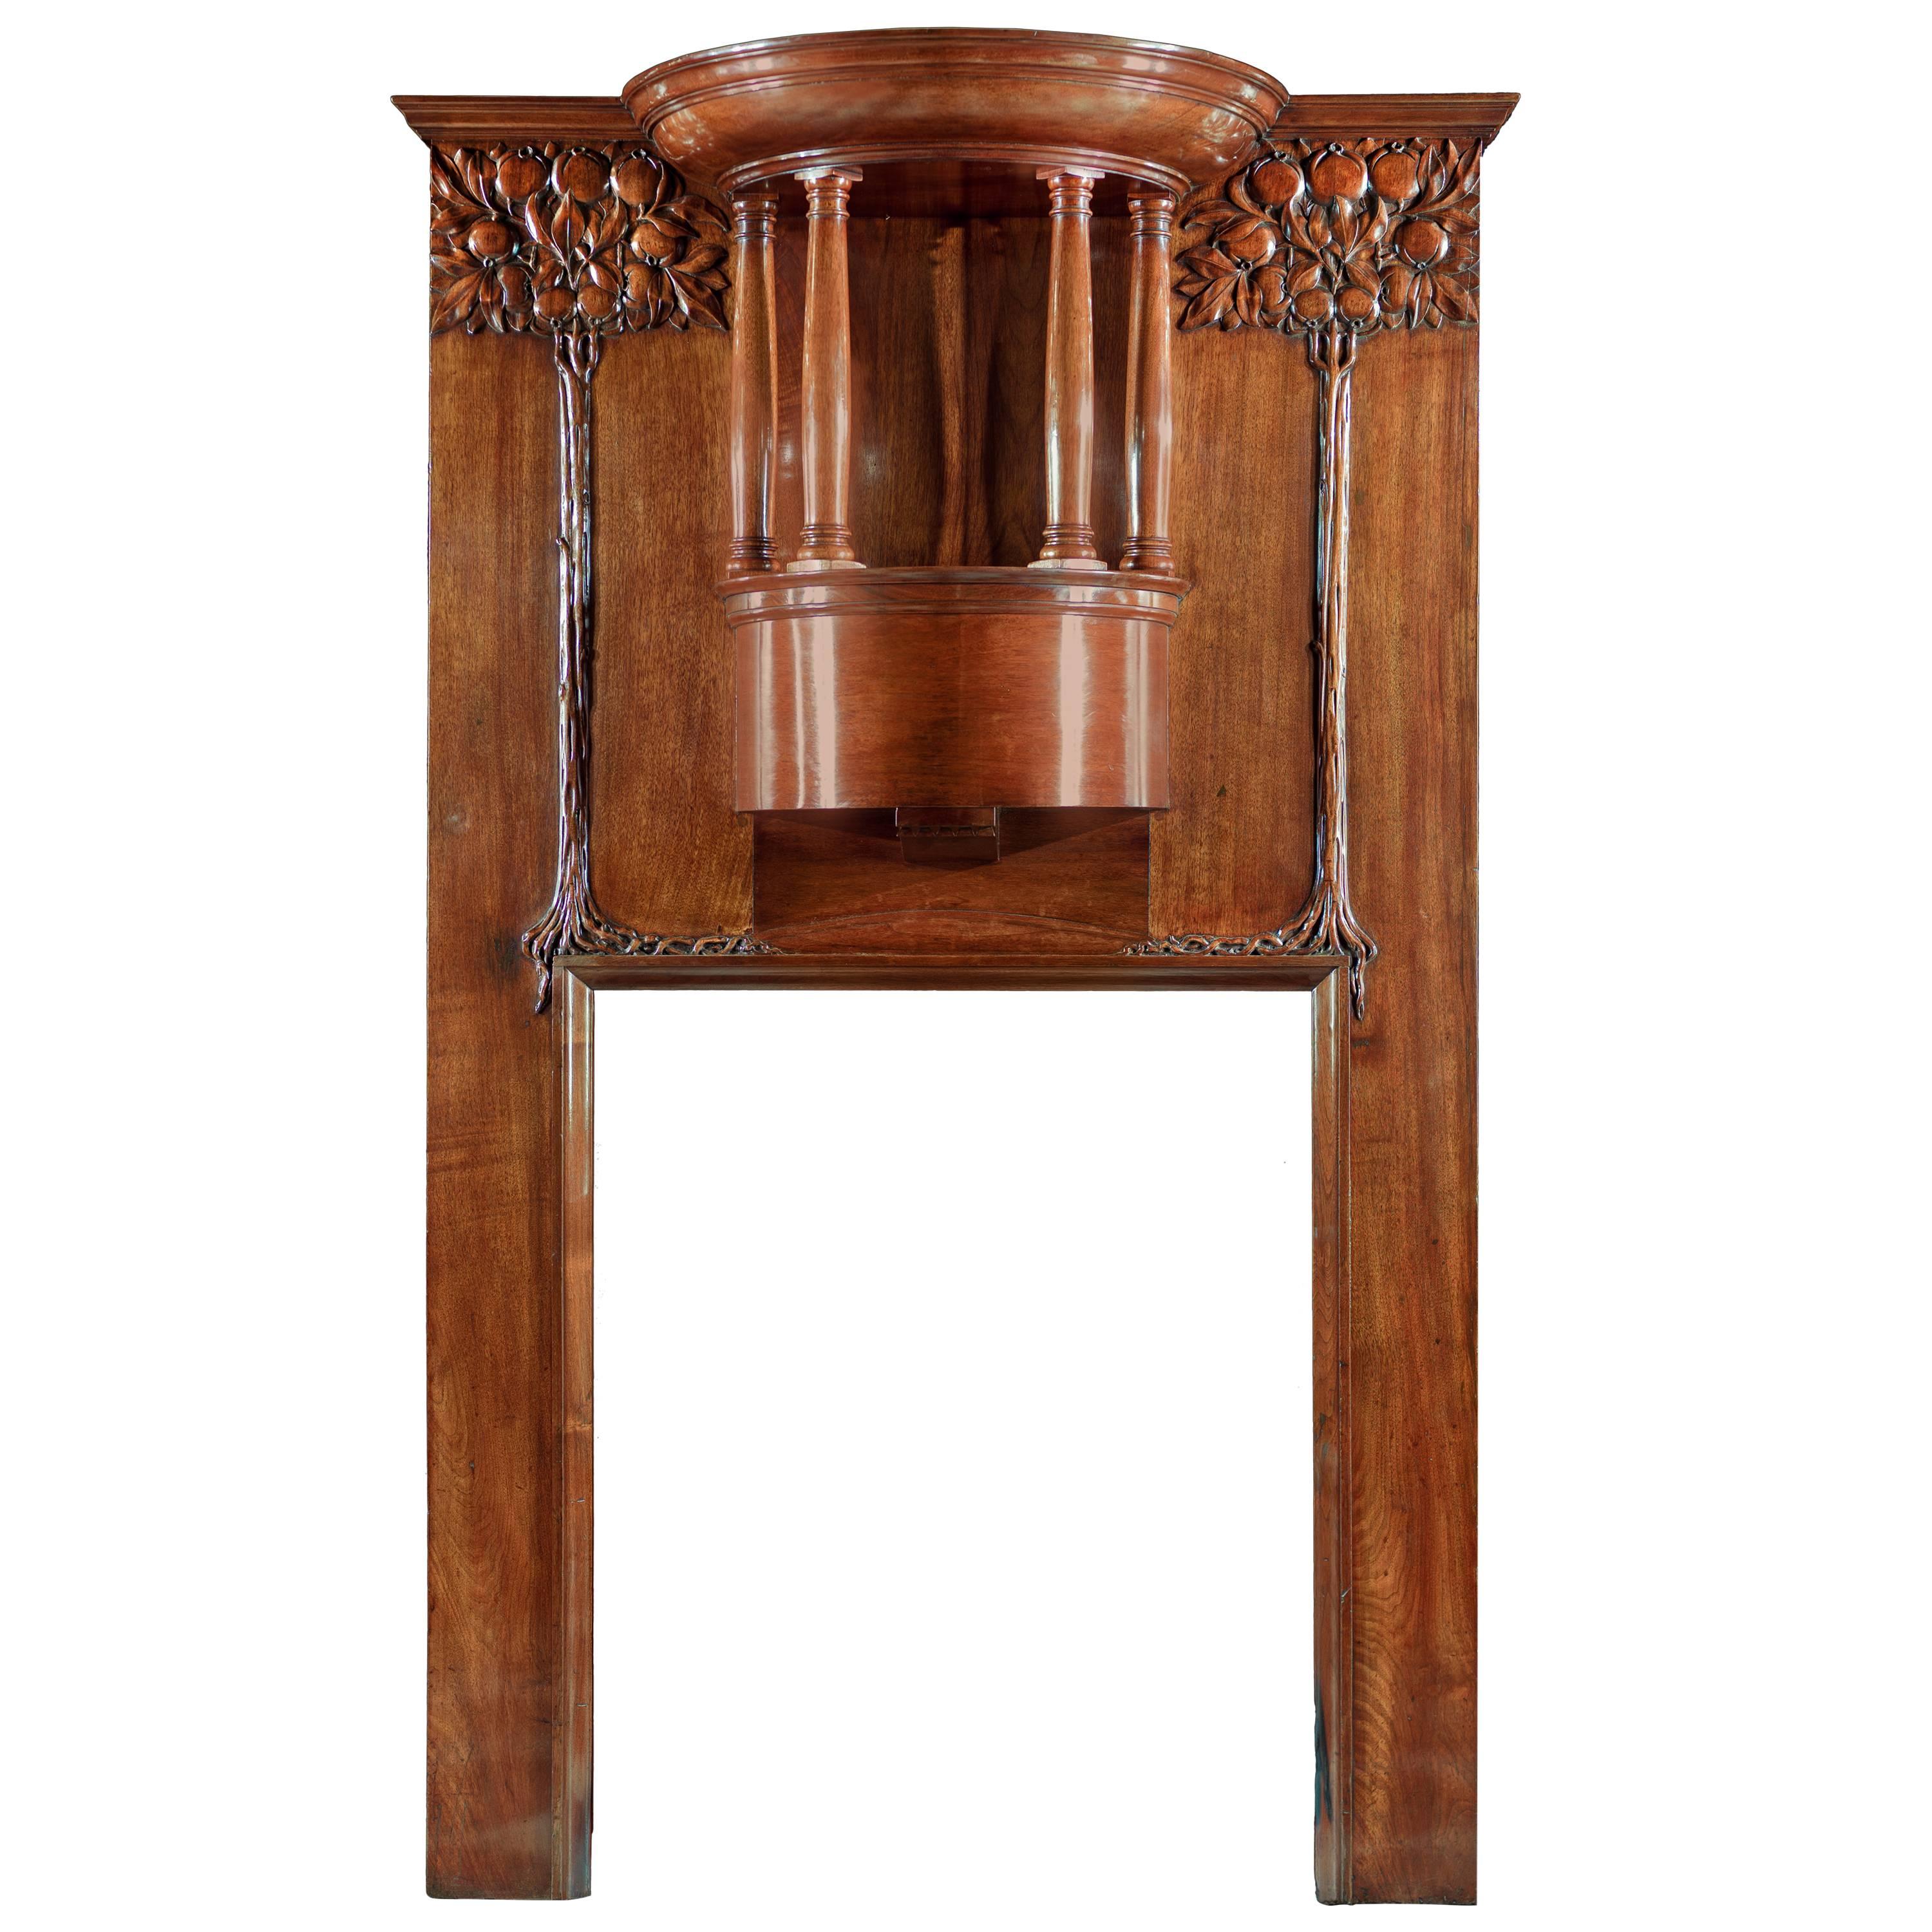 Art Nouveau Walnut Fireplace in the Manner of Charles Harrison Townsend